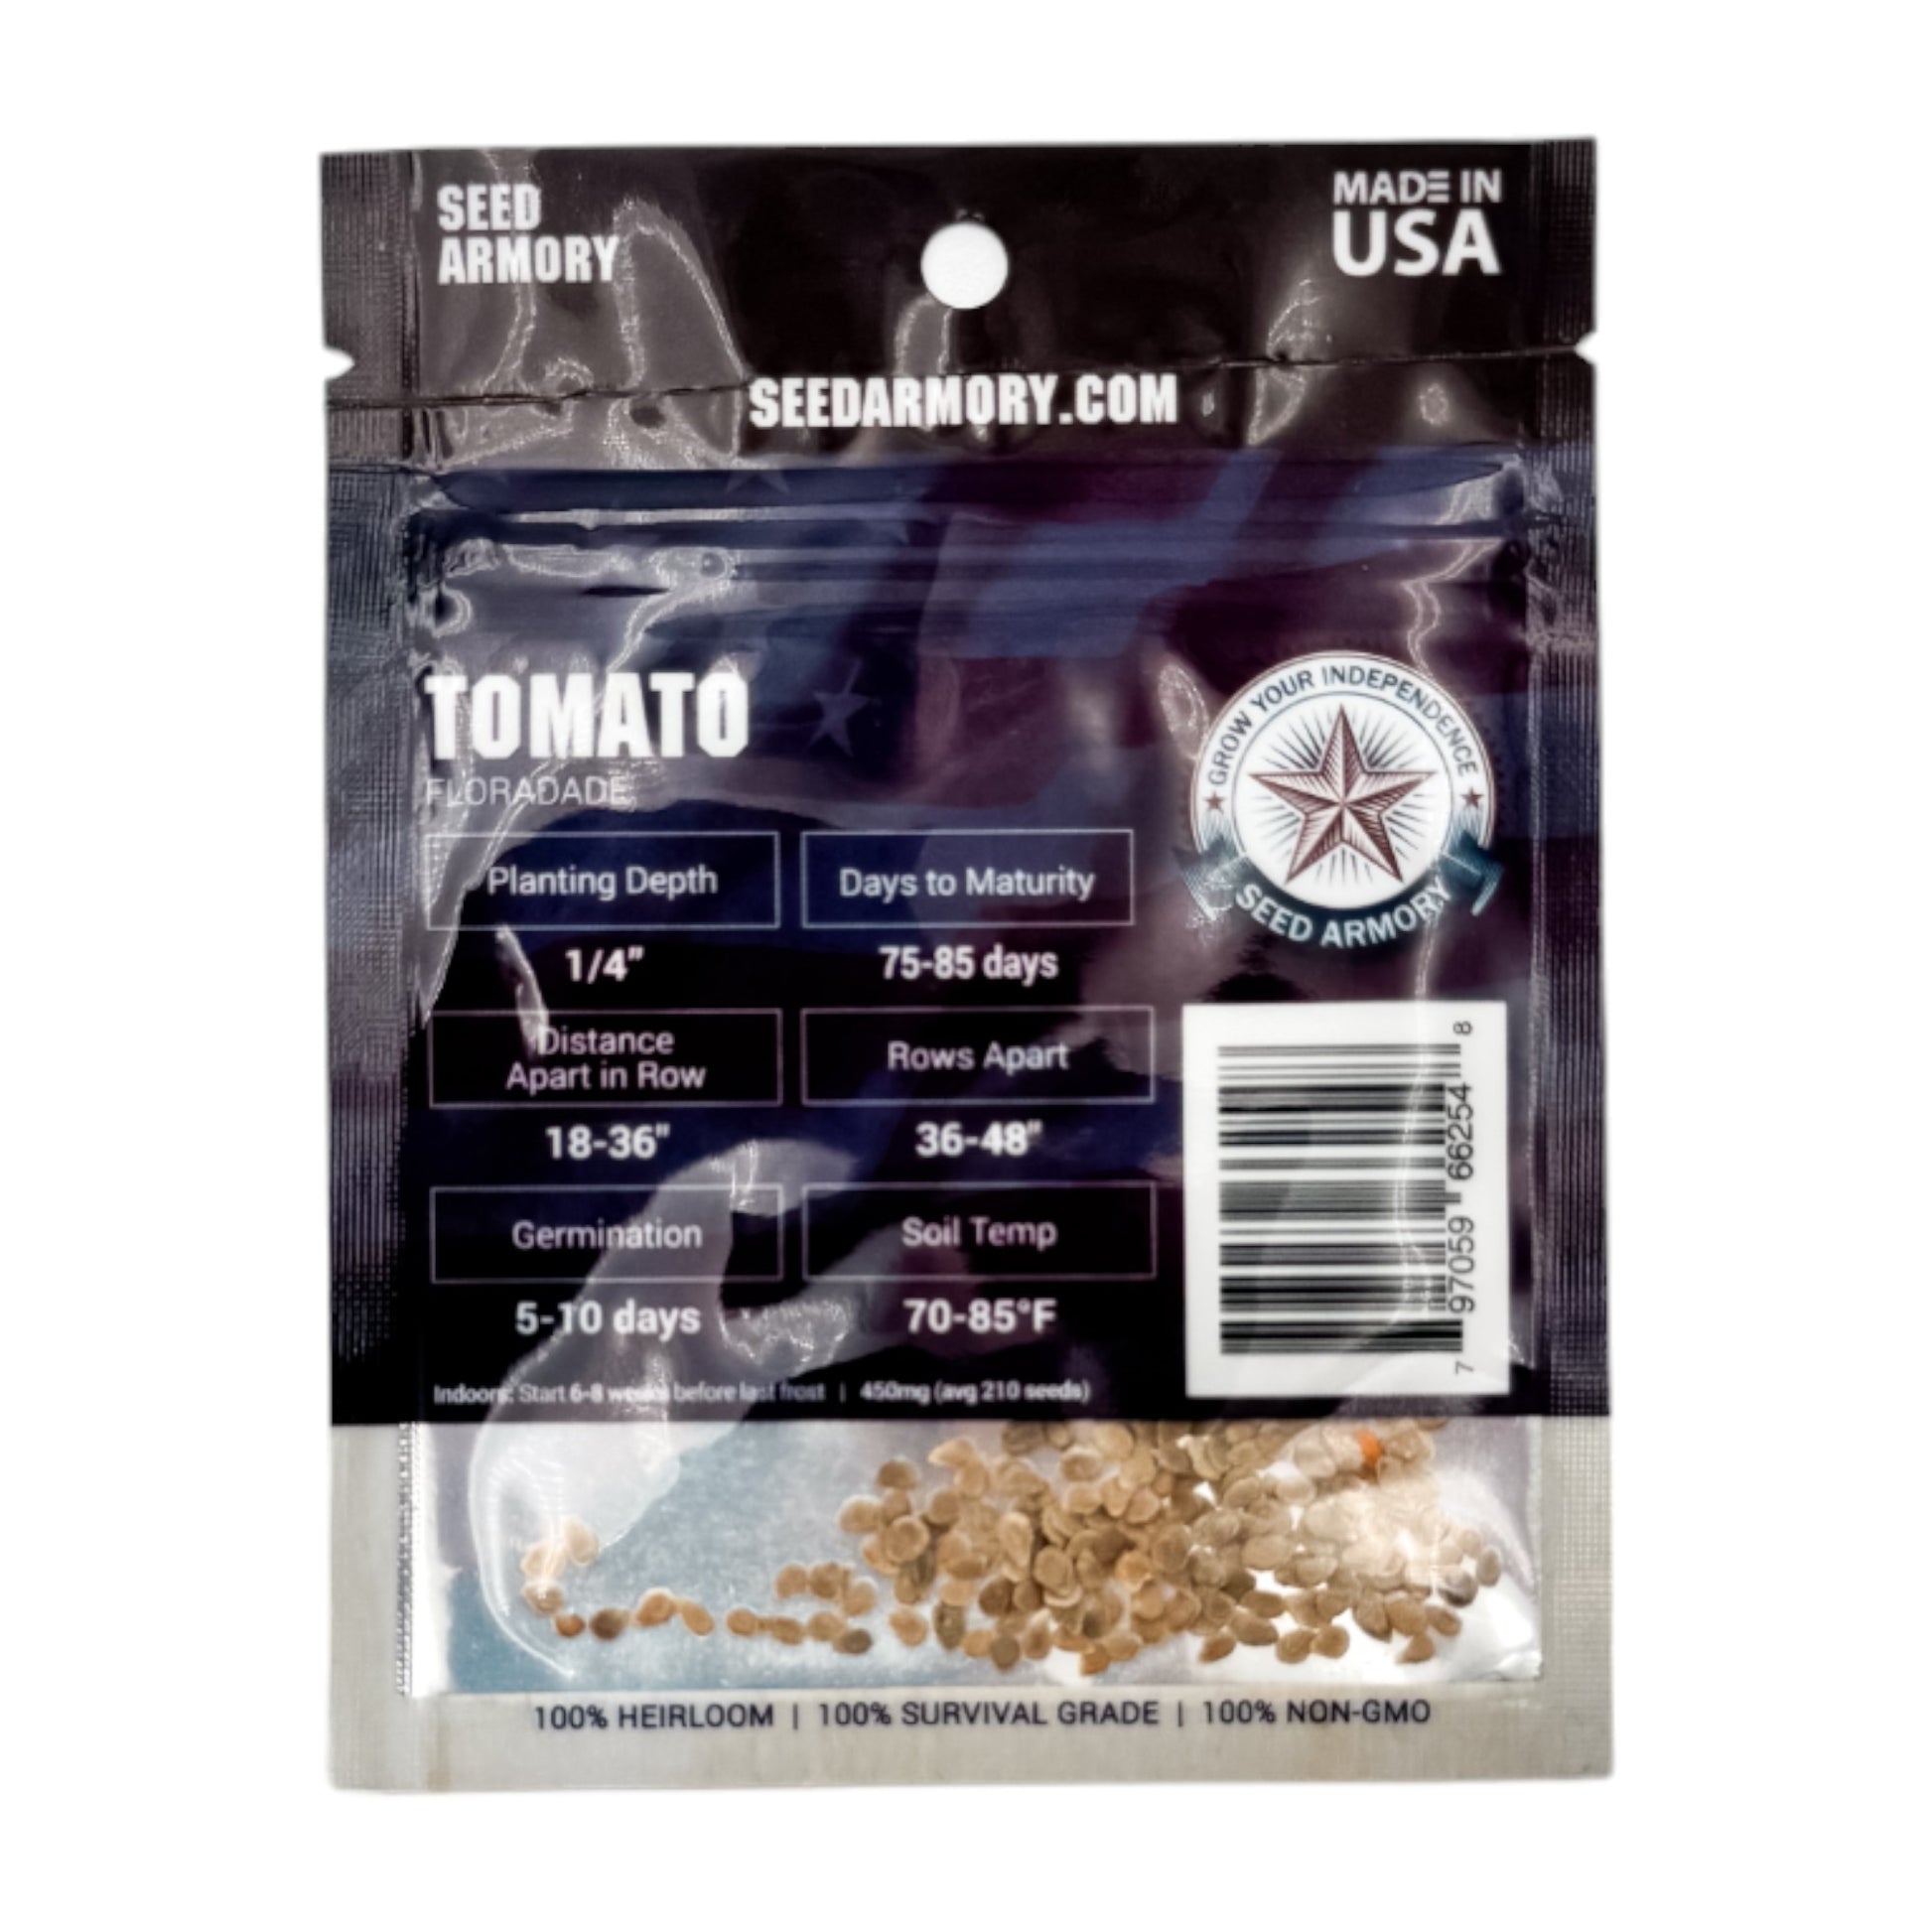 Reverse packet of Floradade Tomato Heirloom Seeds with planting instructions